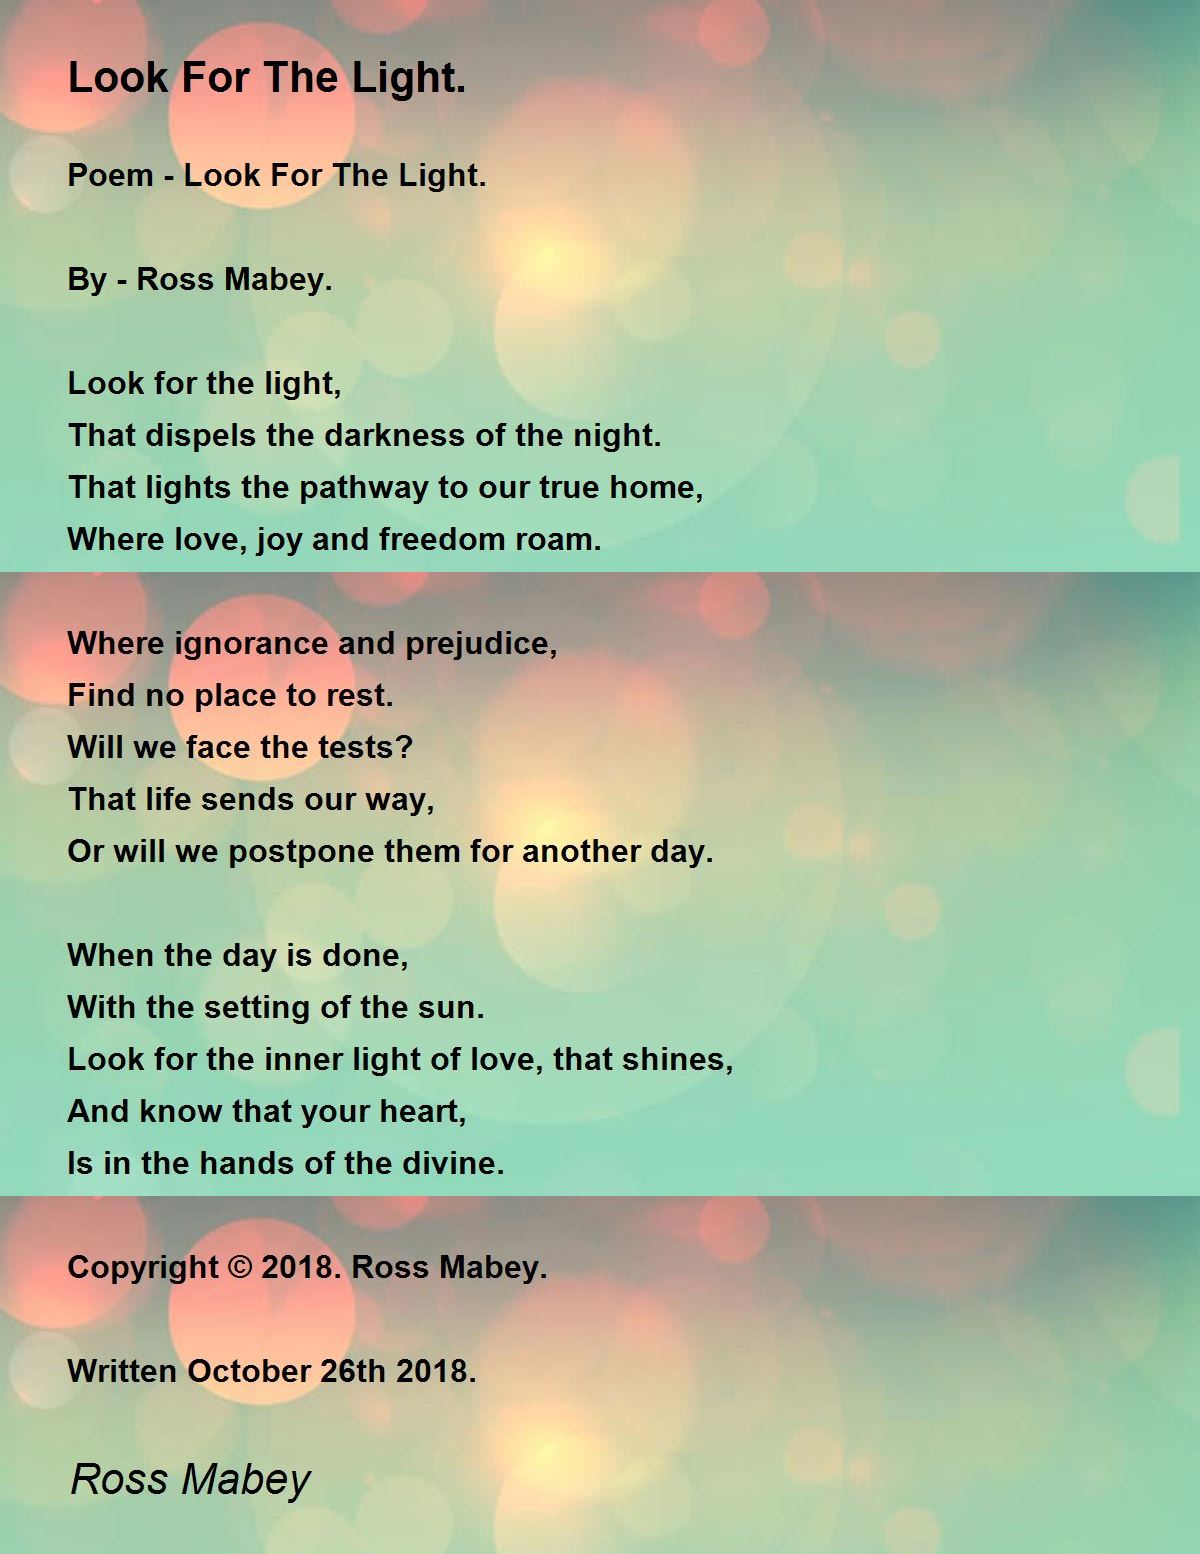 The Light. - Look For Light. Poem by Ross Mabey